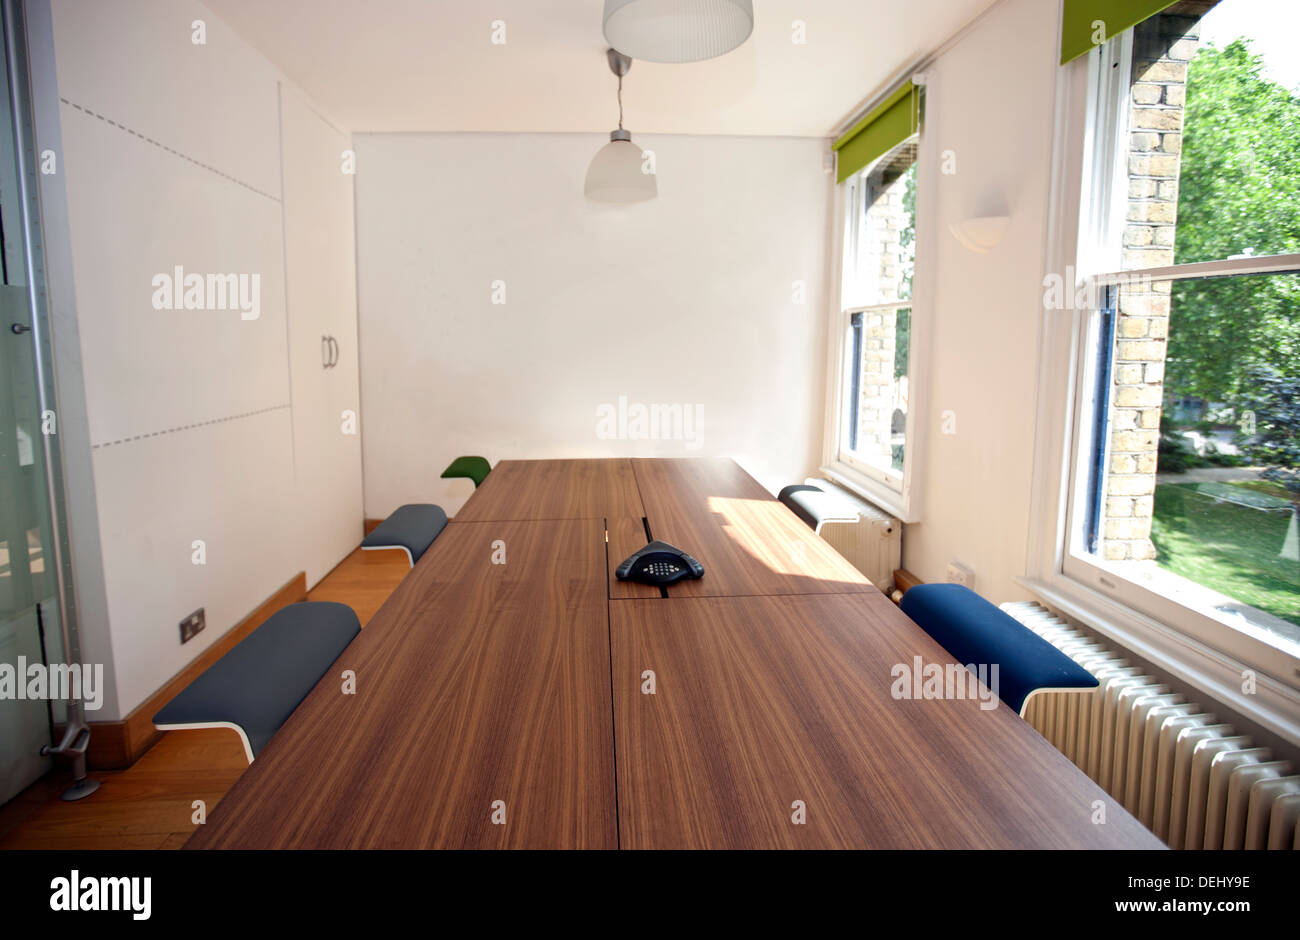 Empty conference room with telephone Stock Photo